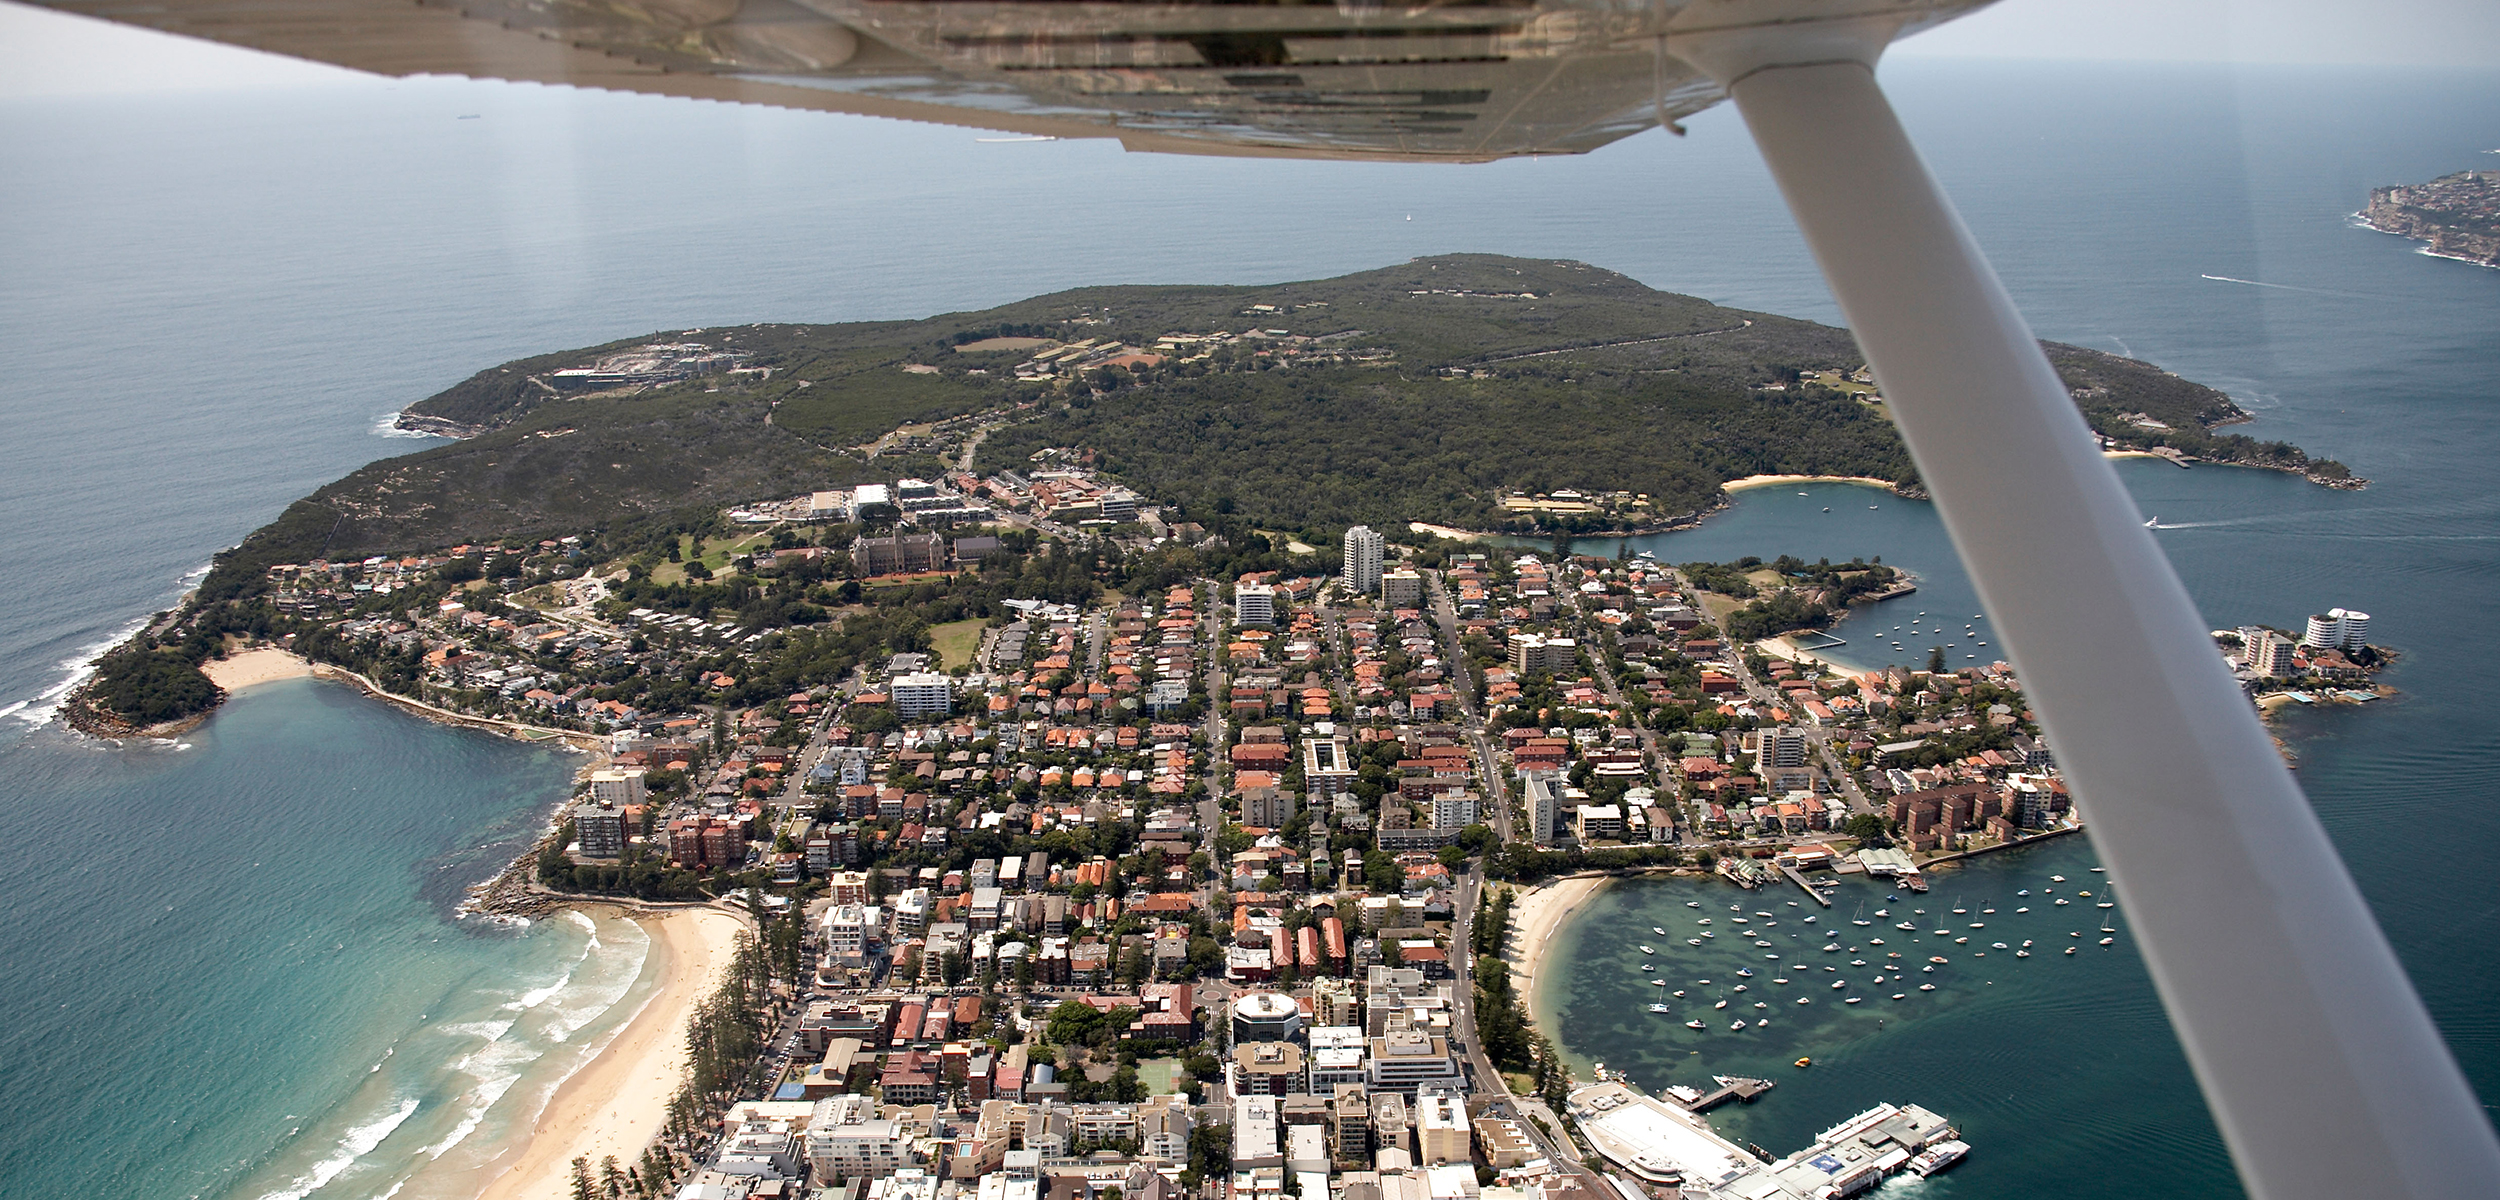 An aerial photo from a float plane of a city on a penisula.